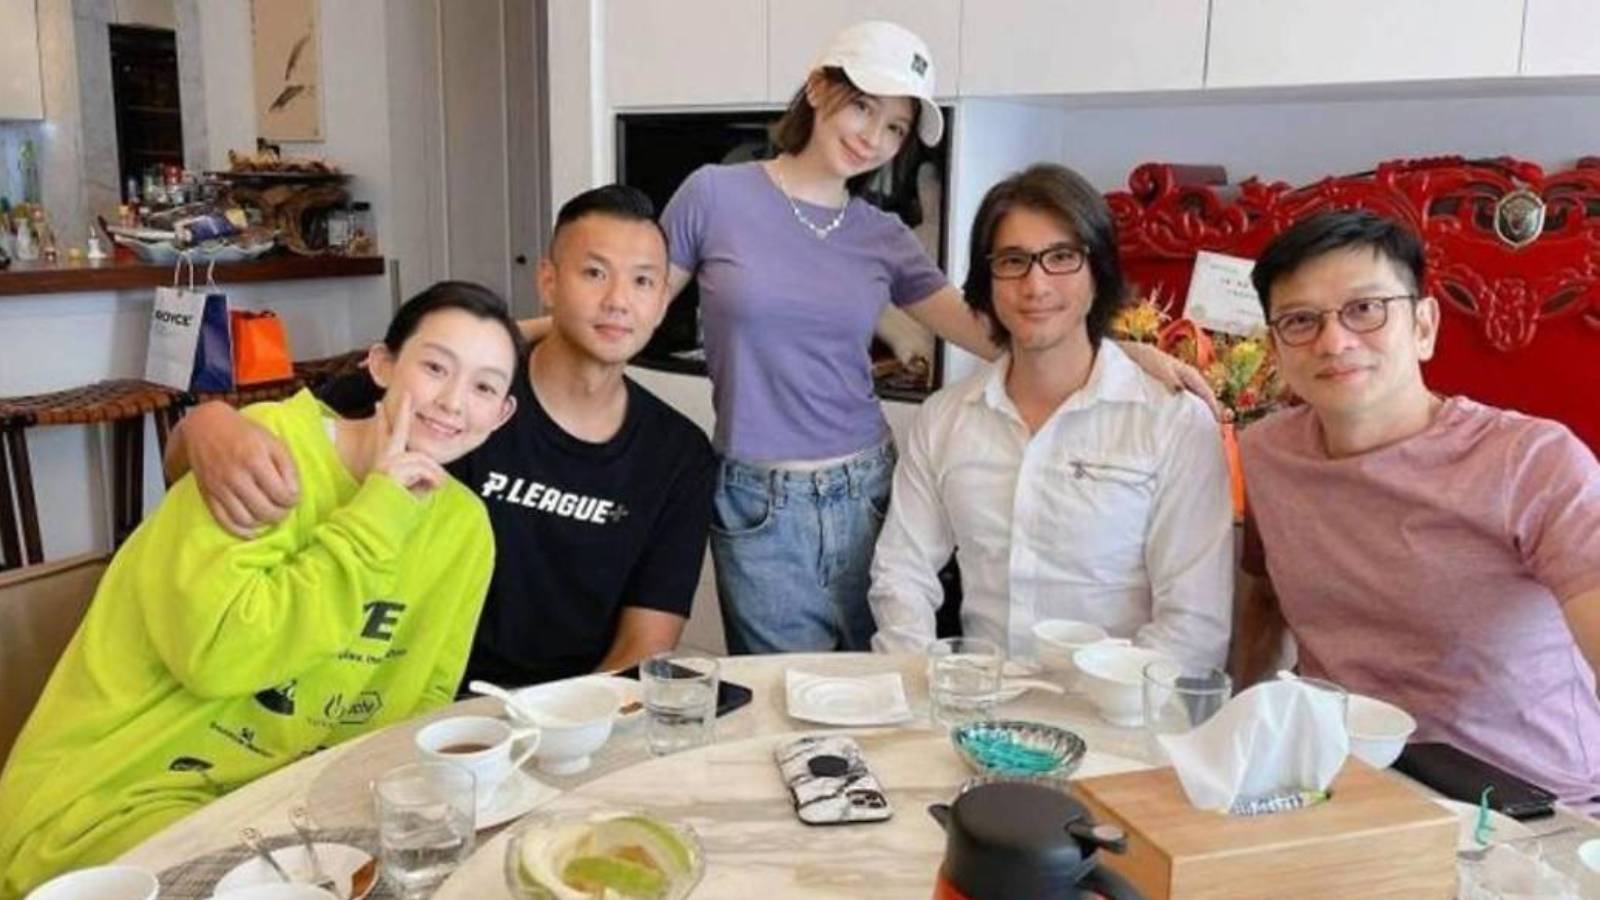 Leehom (in white) with Vivian (in purple) and friends during their gathering in Vivian's apartment